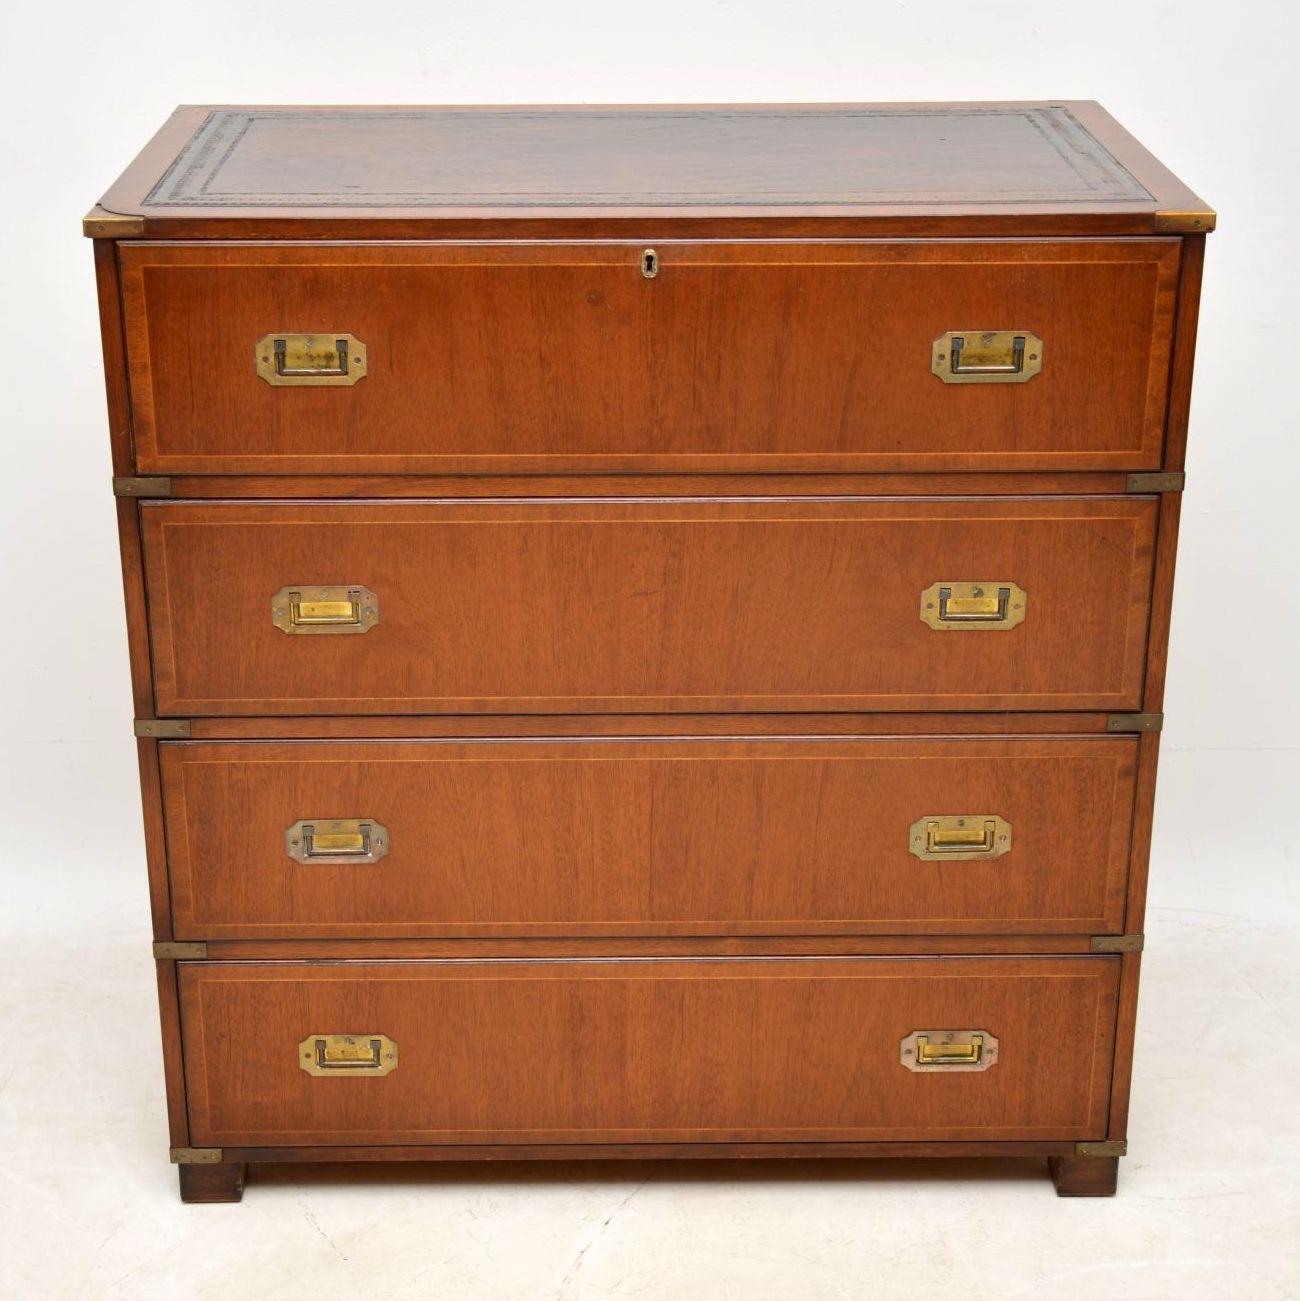 Right now there are a matching pair of bedside chests on the site to go with this piece and they would all go well together in the same room. This mahogany secretaire chest of drawers is antique military style and dates from around the 1950s period.